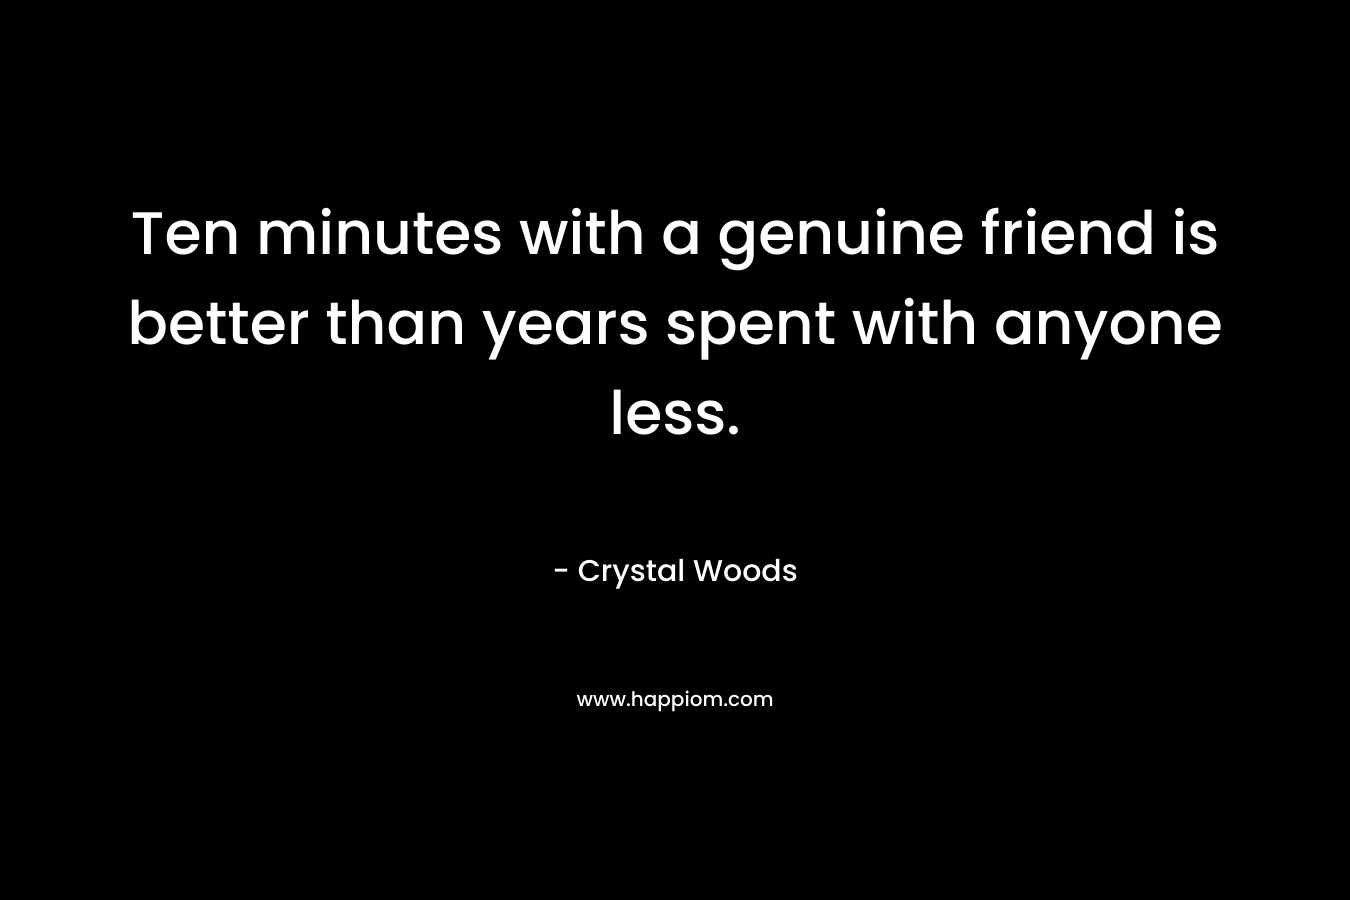 Ten minutes with a genuine friend is better than years spent with anyone less.